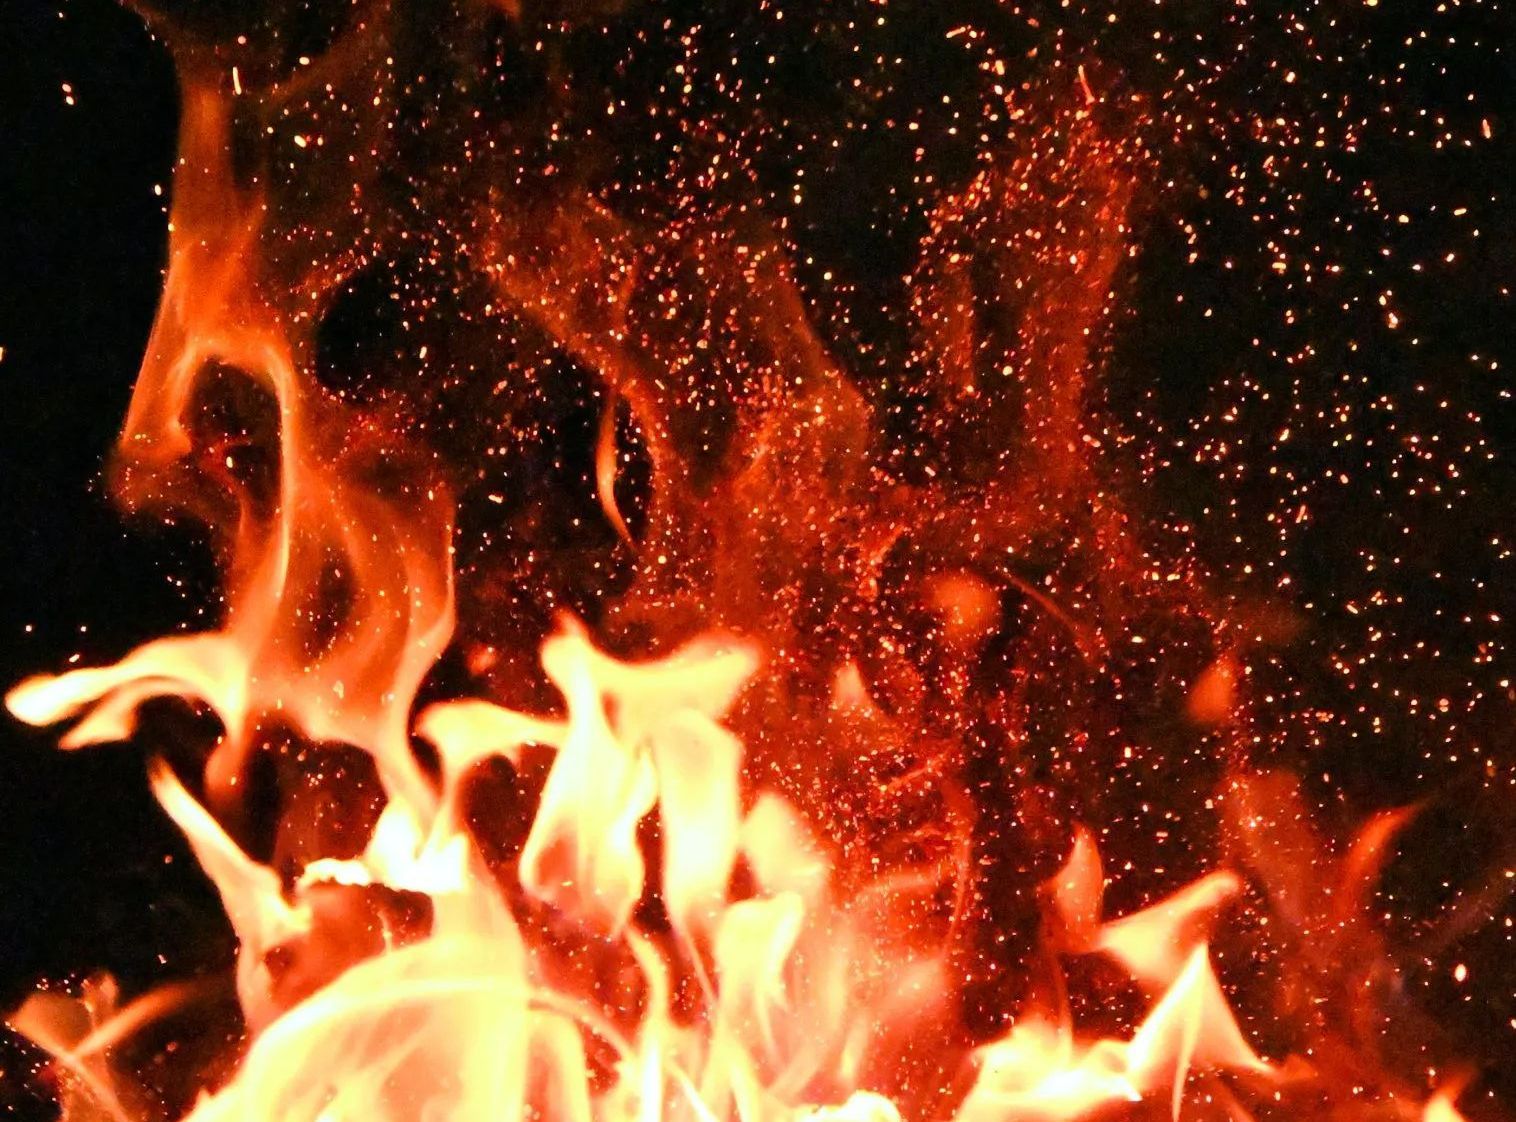 Types of Fire Damage